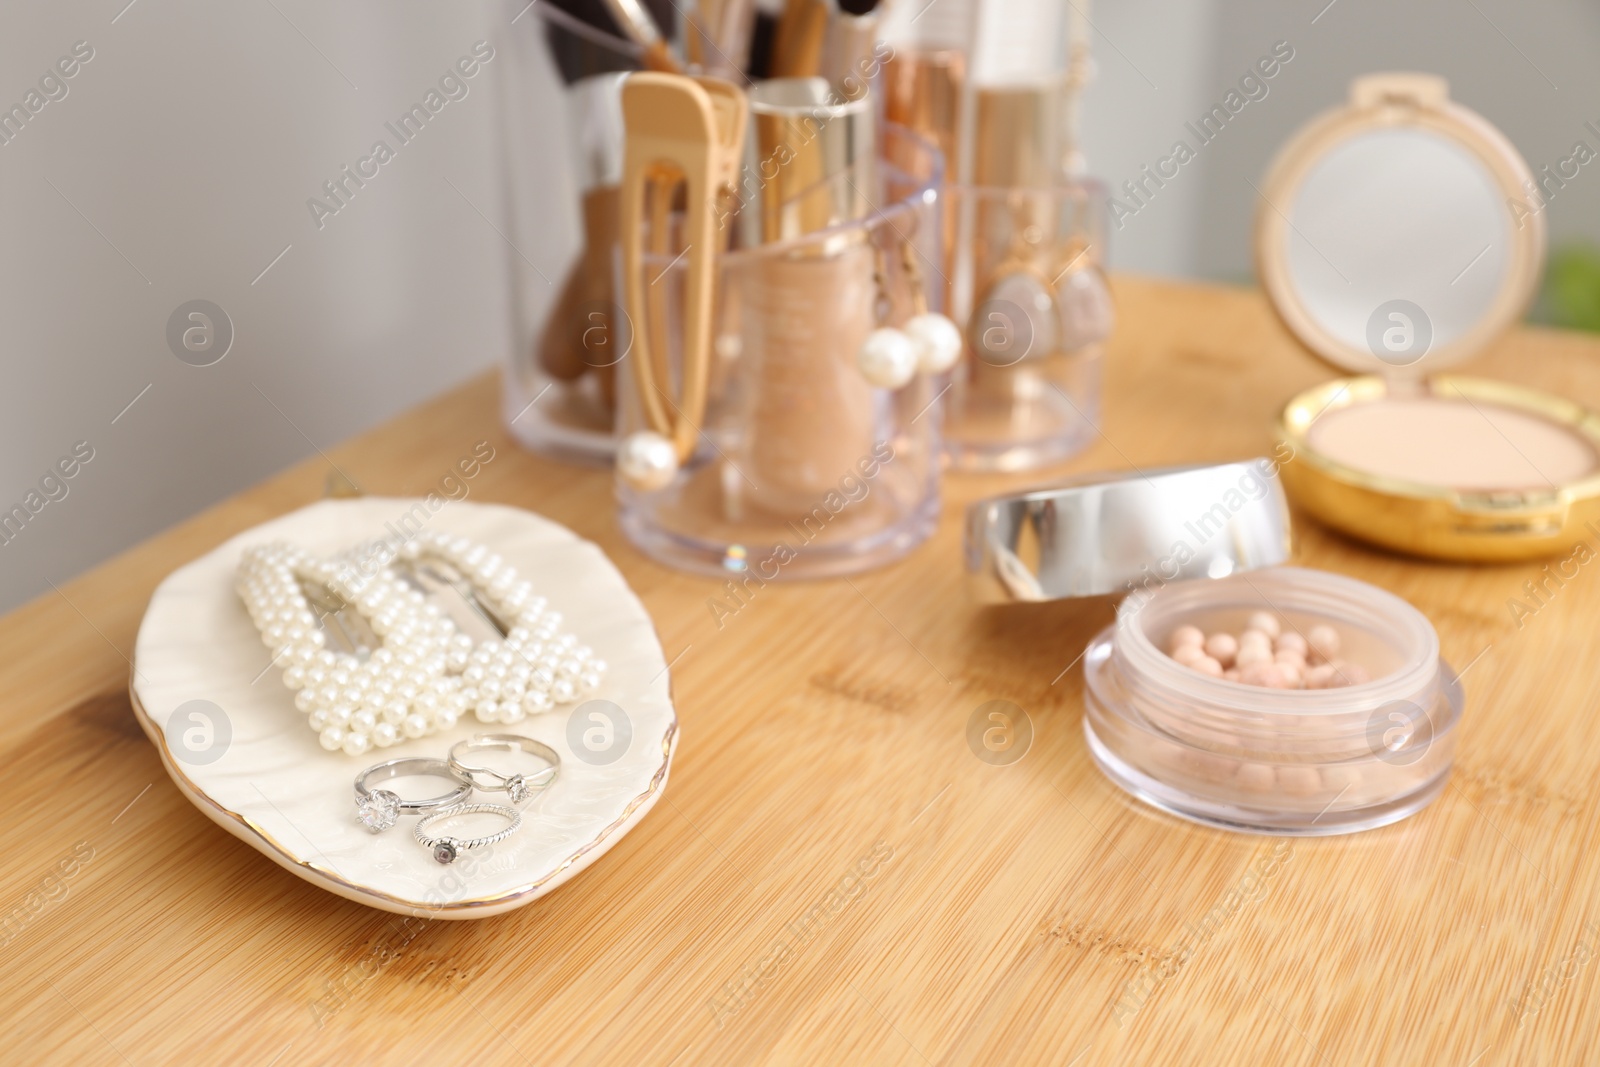 Photo of Makeup cosmetics and woman's accessories on wooden dressing table